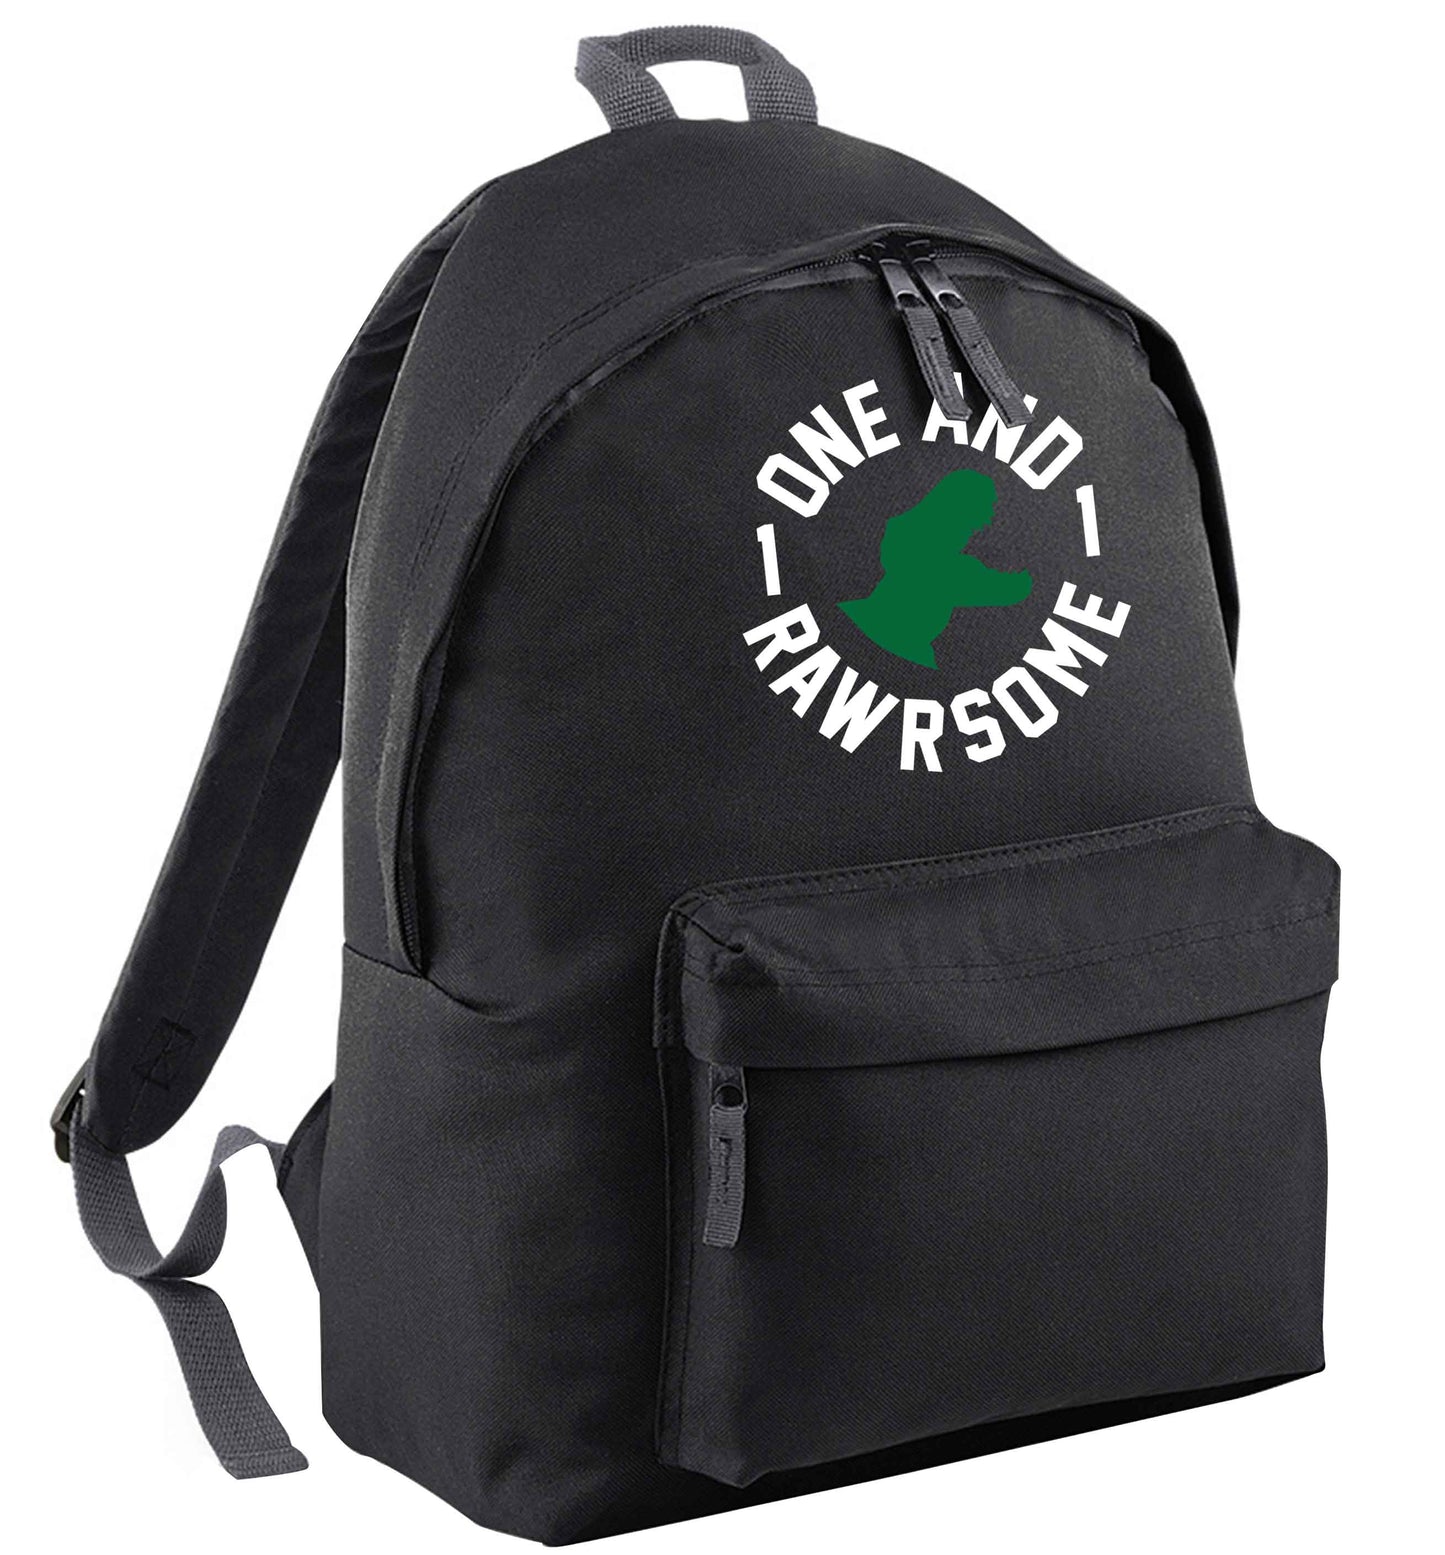 One and Rawrsome | Adults backpack